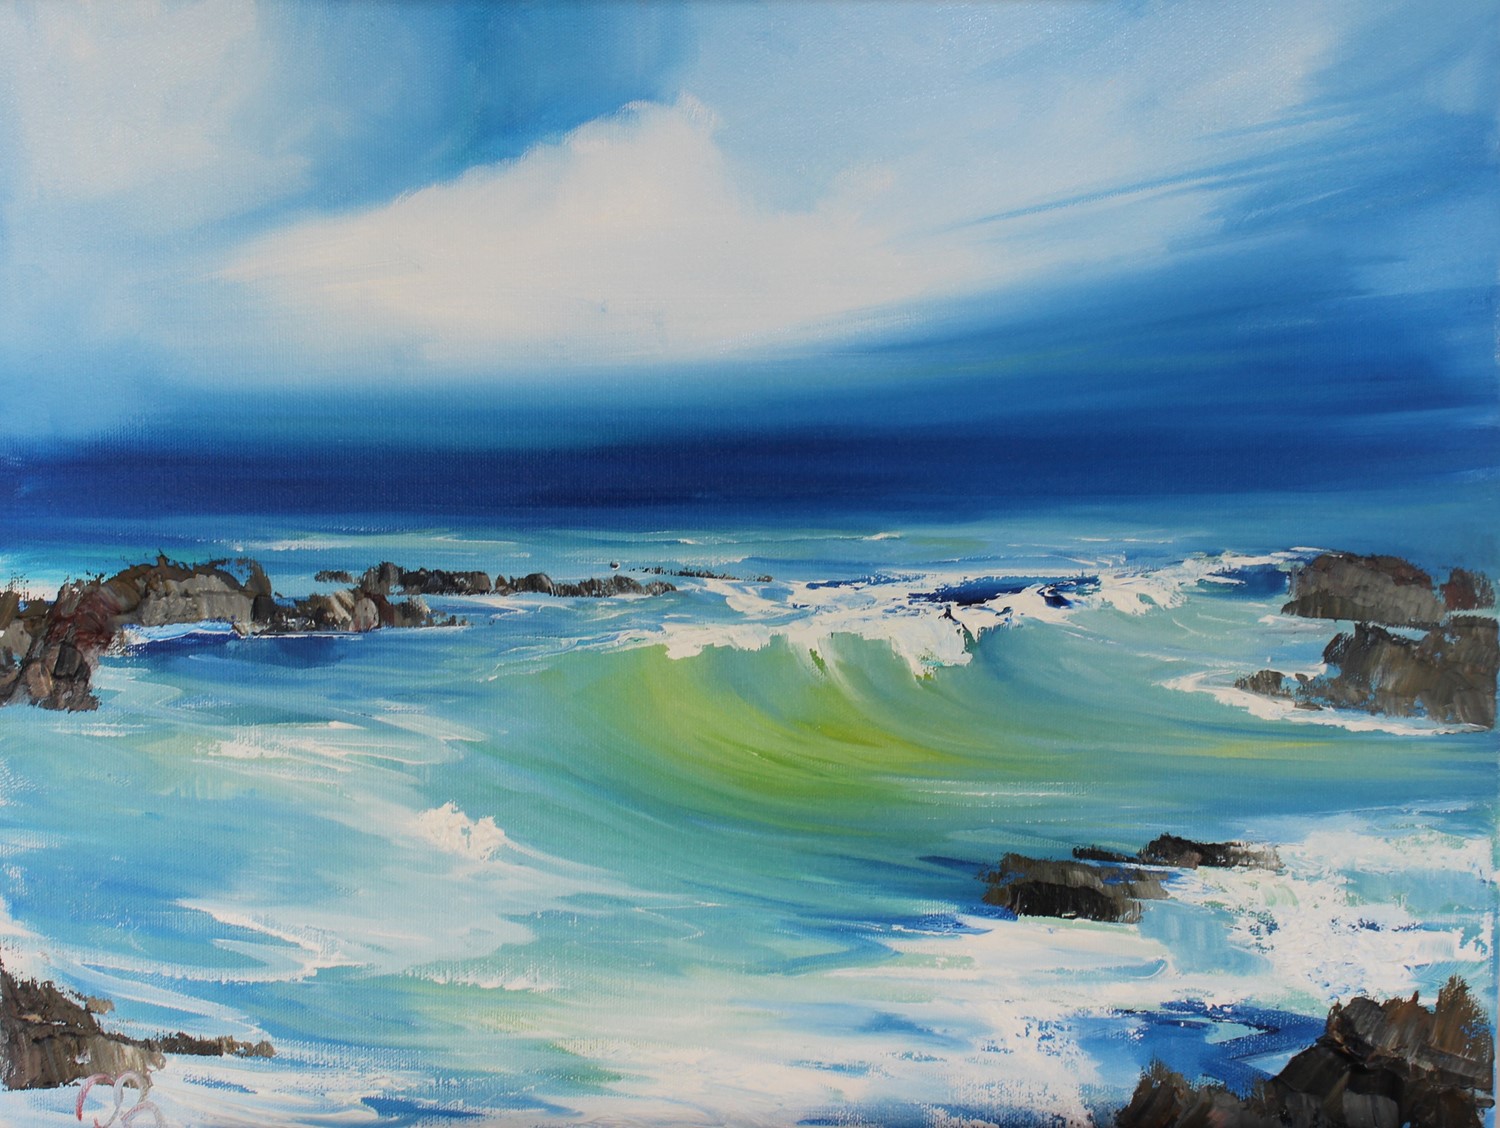 'Waves catching the light ' by artist Rosanne Barr